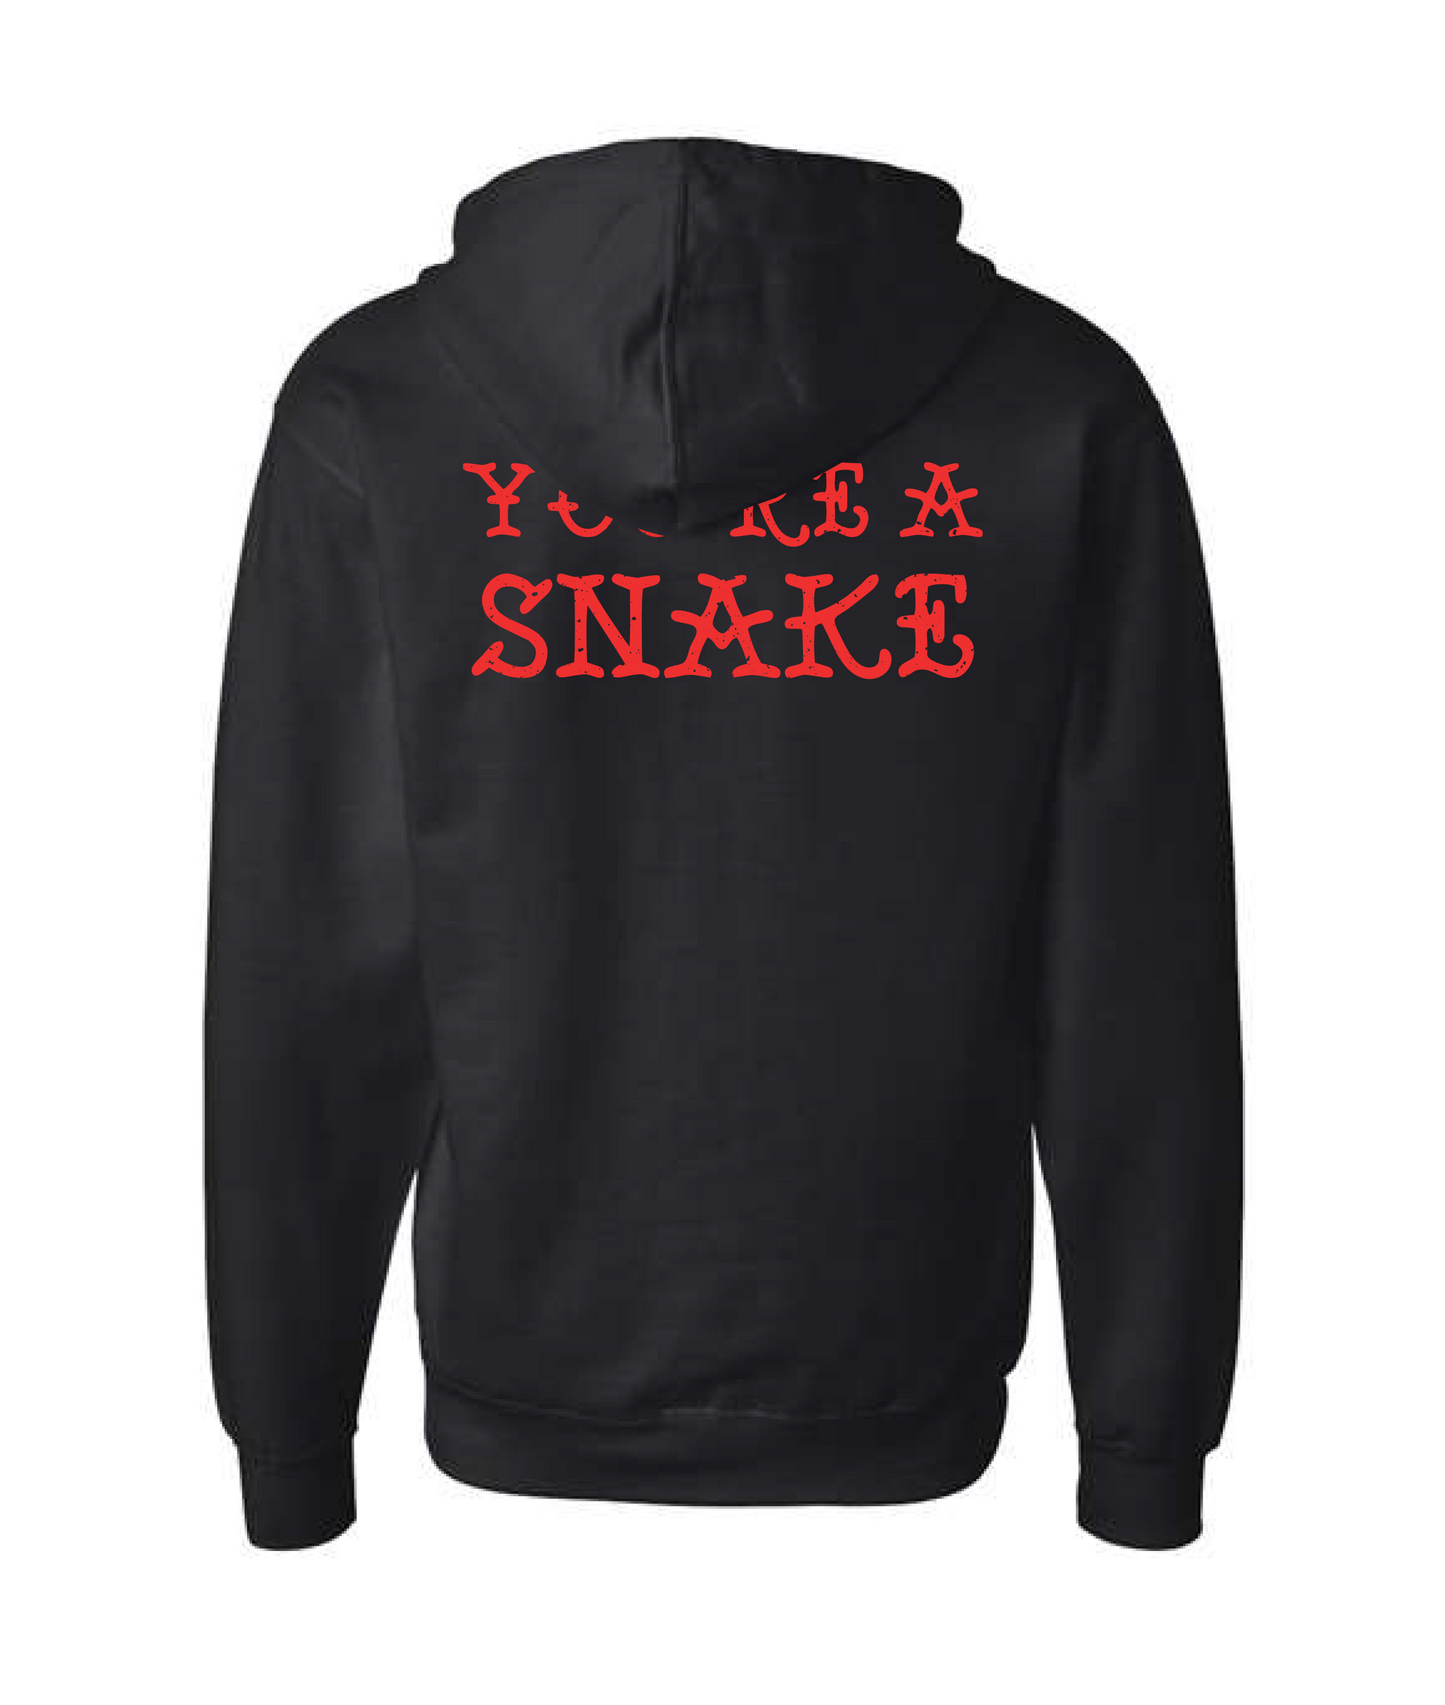 Relent - YOU'RE A SNAKE - Black Zip Up Hoodie